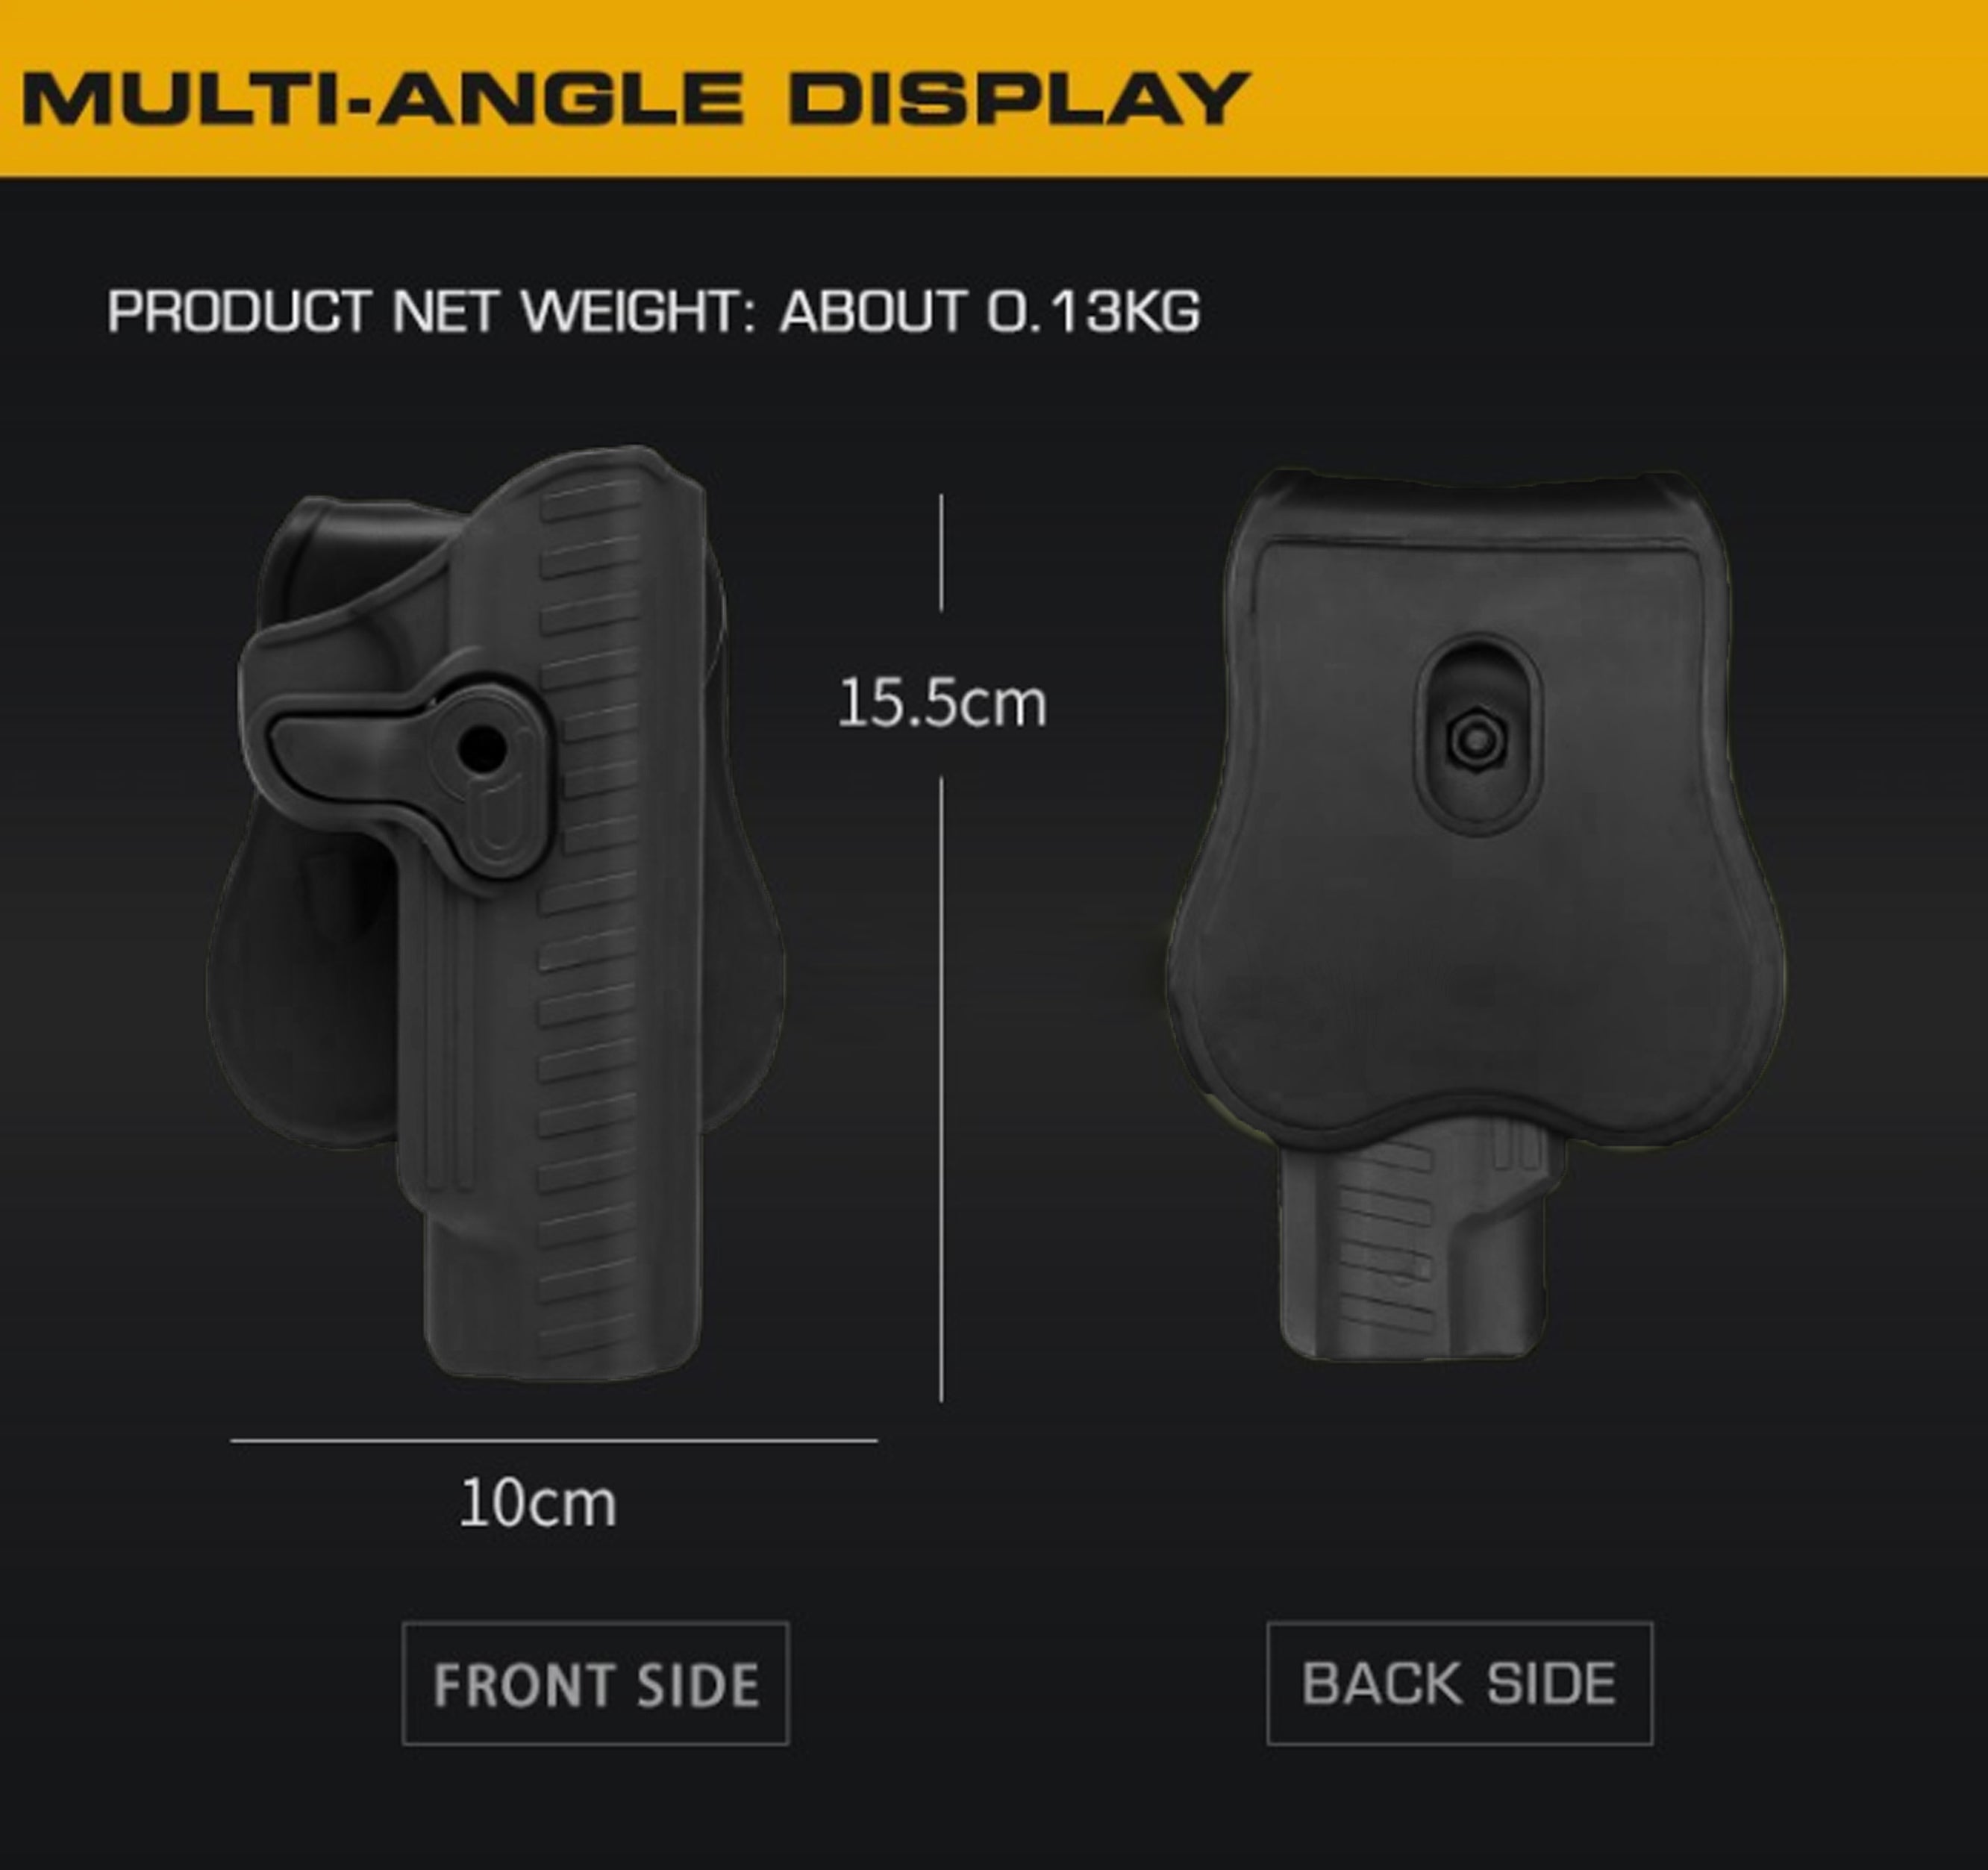 WOSPORT 1911 QUICK PULL HOLSTER GB44